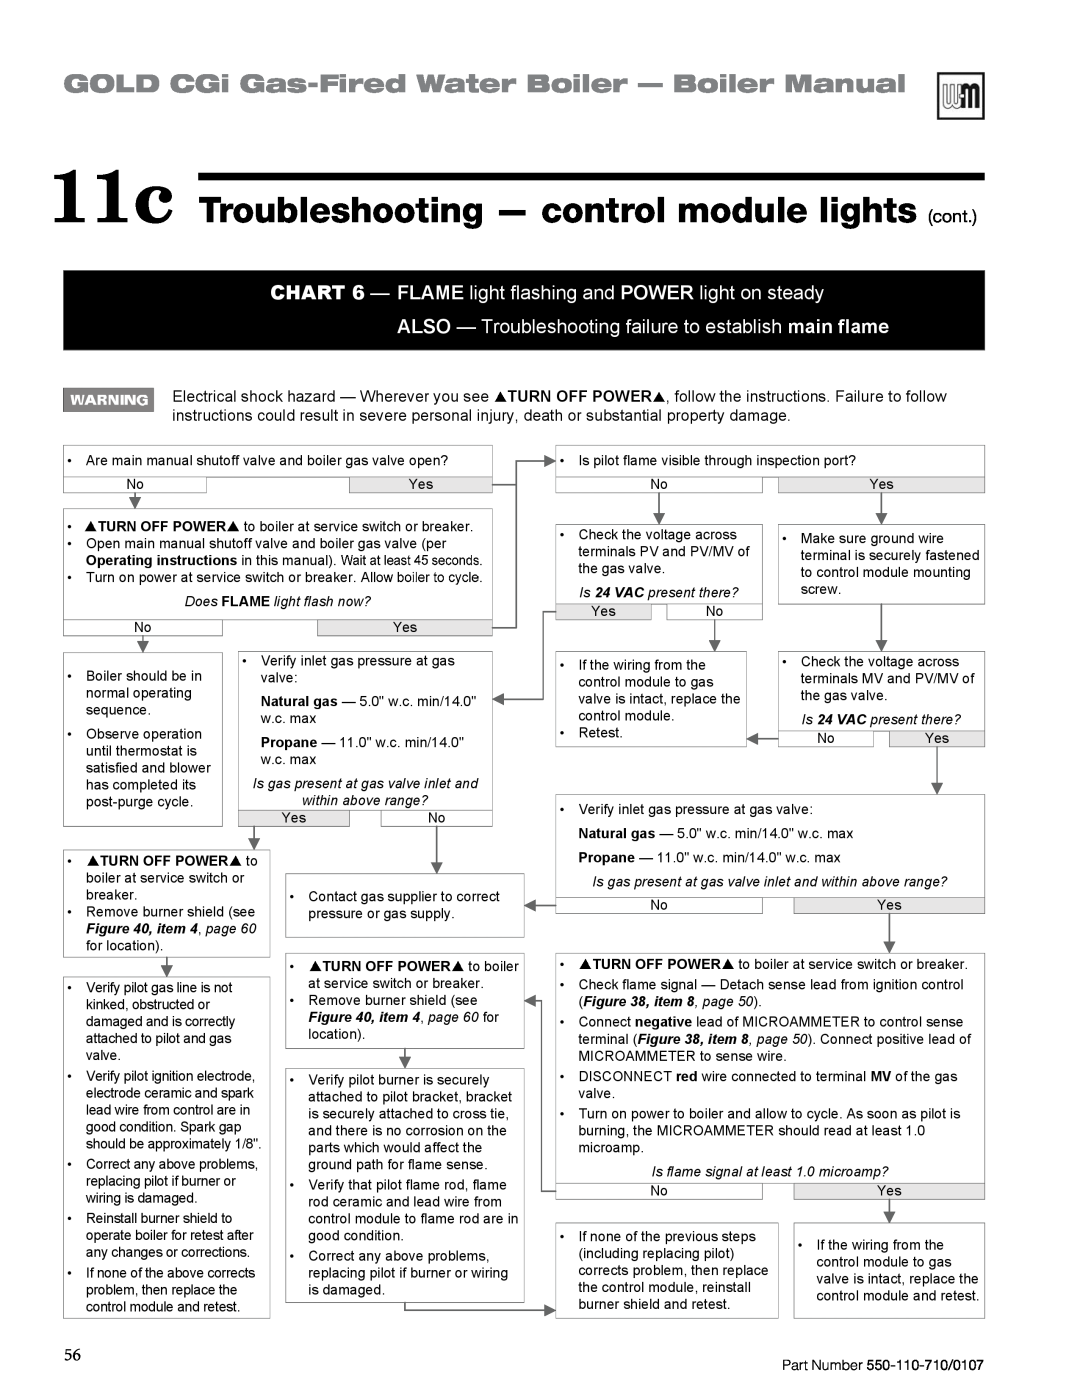 Weil-McLain 550-110-710/0107 11c Troubleshooting — control module lights cont, follow the instructions. Failure to follow 